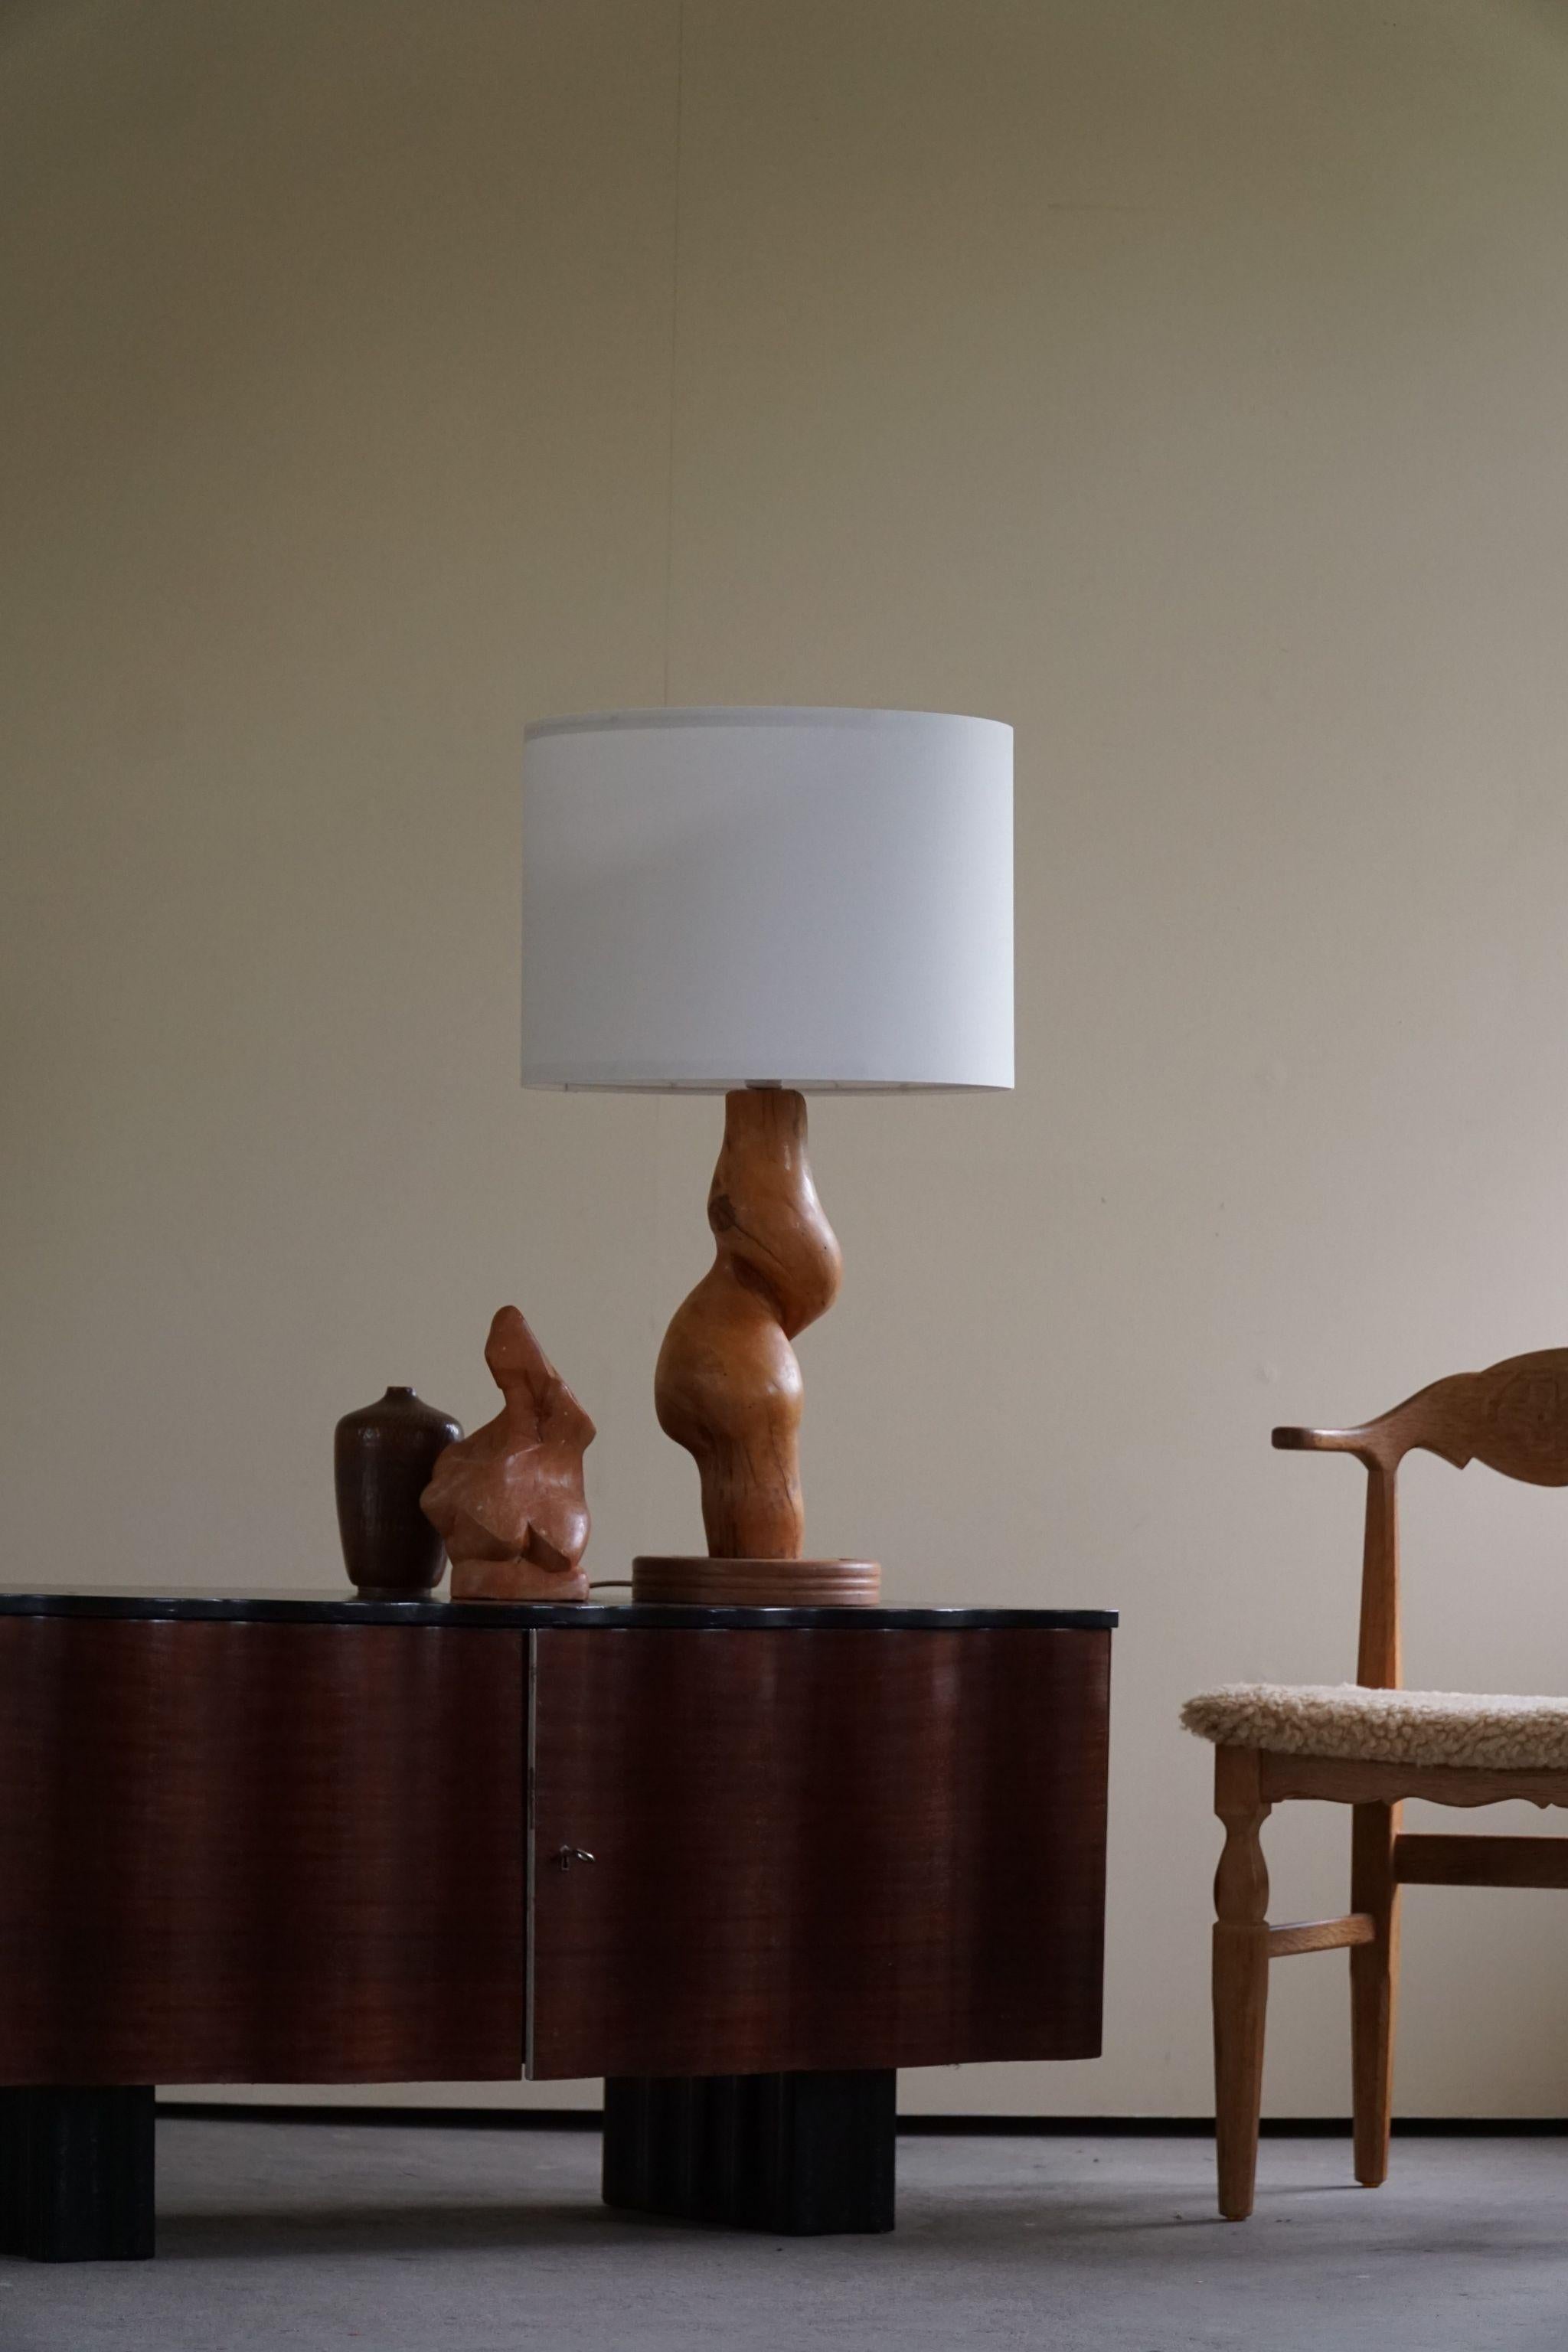 Organic shaped wooden table lamp. Hand crafted in Scandinavia by a unknown cabinetmaker, ca 1970s. 

The overall impression of this mid century table lamp is really good.
It will complementary many interior styles. A modern, classic, Scandinavian or